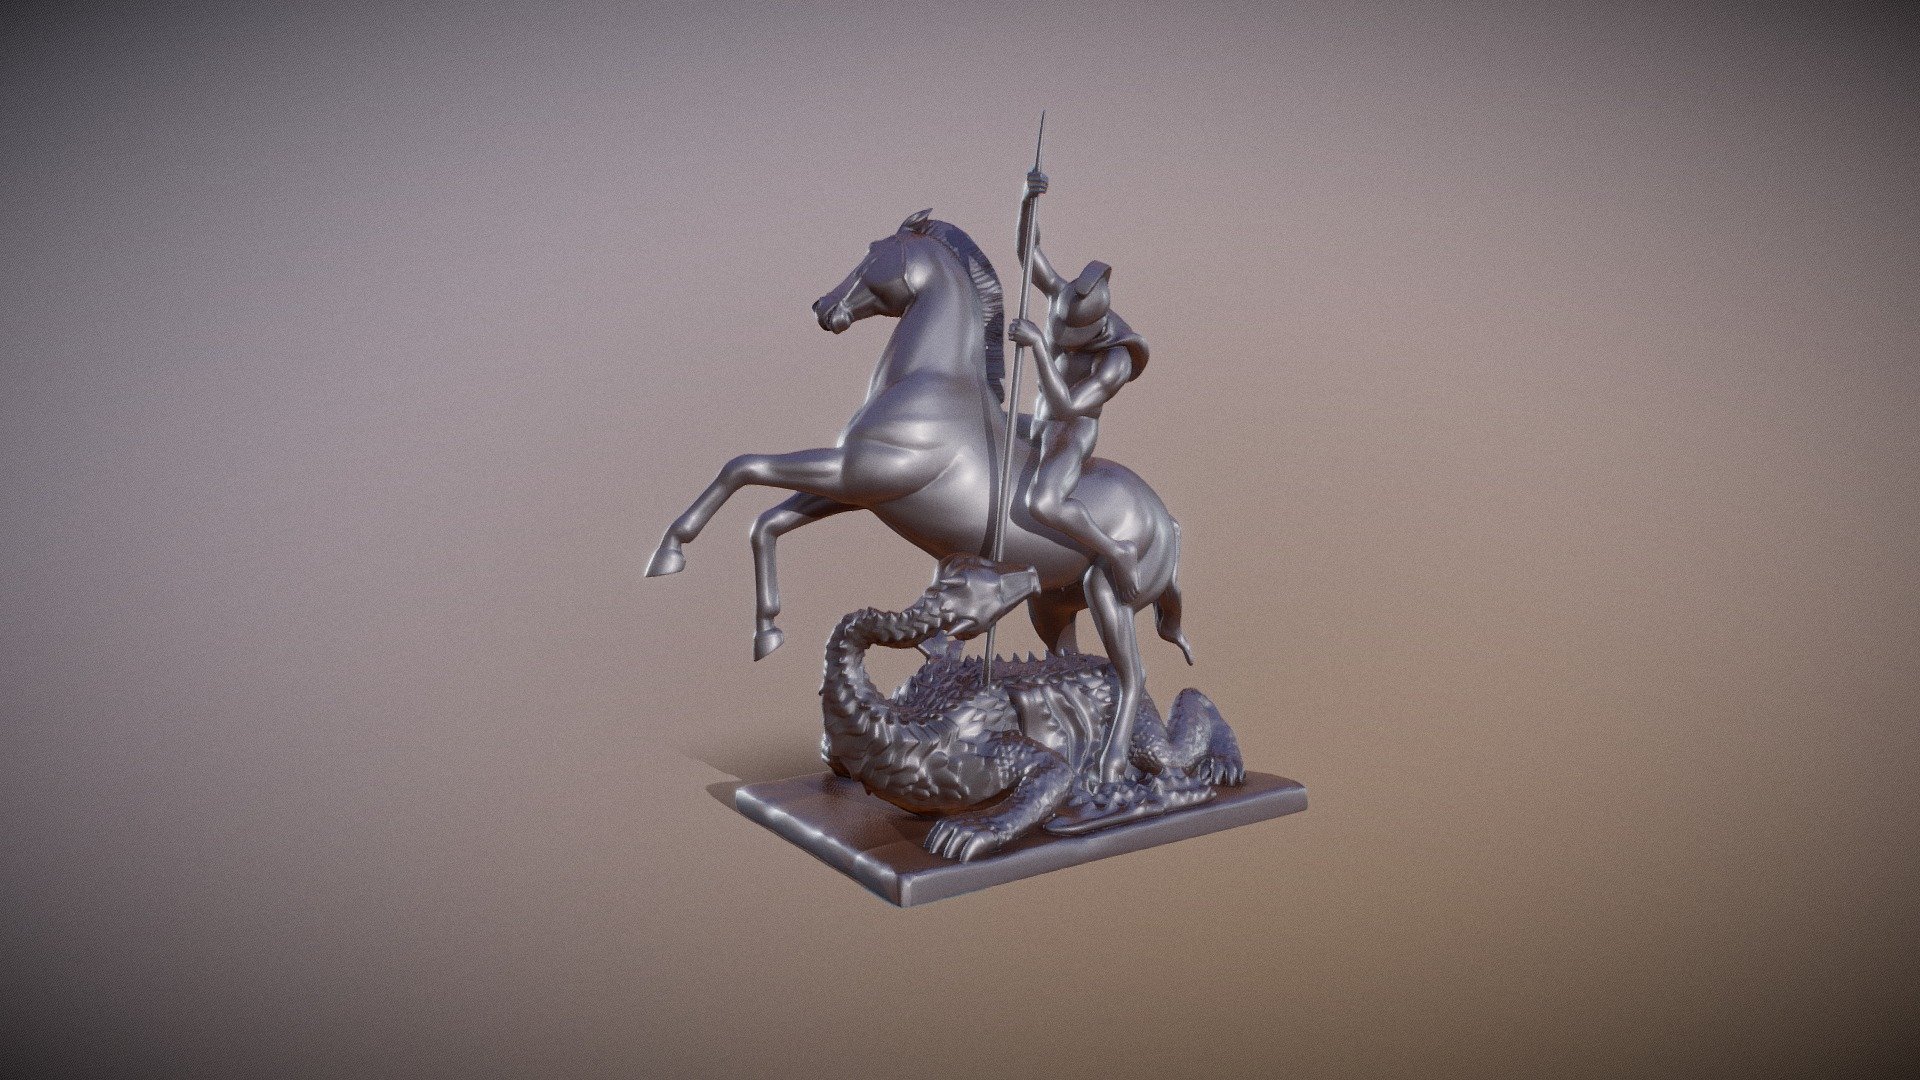 Saint George and the Dragon statue for 3d print, sculpted in zbrush. 

The zip file contains the model files in one piece and is provided in both stl and obj formats.

In history, there have been many heroic stories about warriors killing beasts and saving people. Speaking of a warrior who is also a Christian saint, we will think of Saint George. The most famous dragon slaying story in Western culture is “Saint George slaying the dragon” 3d model